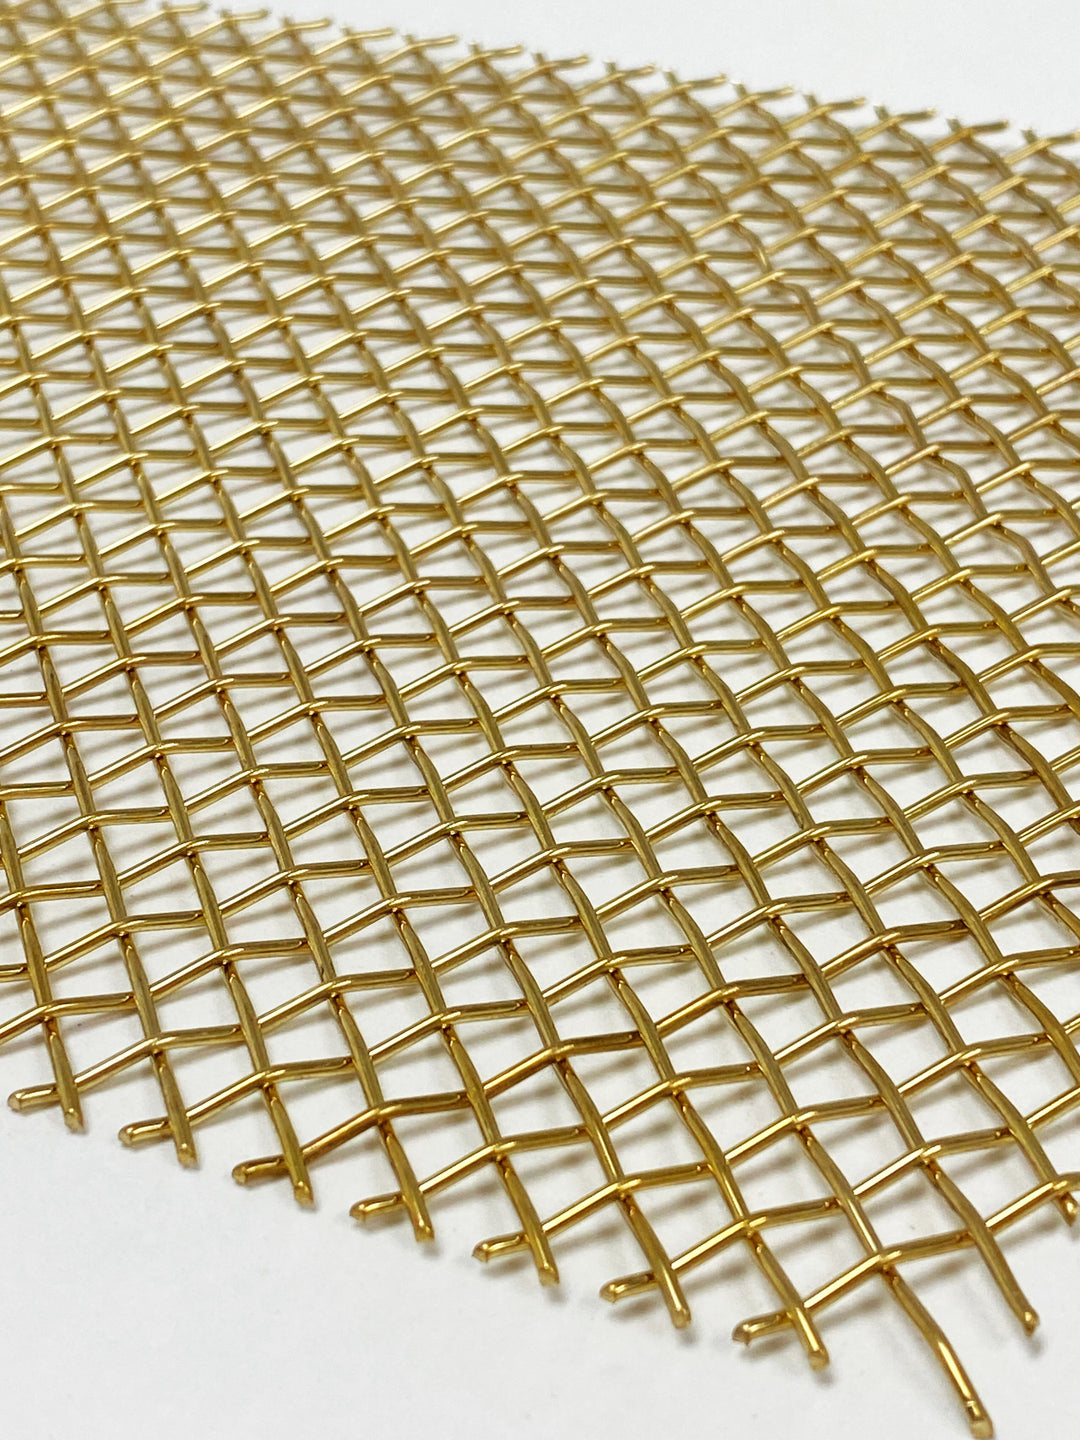 Wire Mesh Brass Architectural Woven Furniture and Creative Grille Mesh LB - Purdy Hardware - Wire Mesh